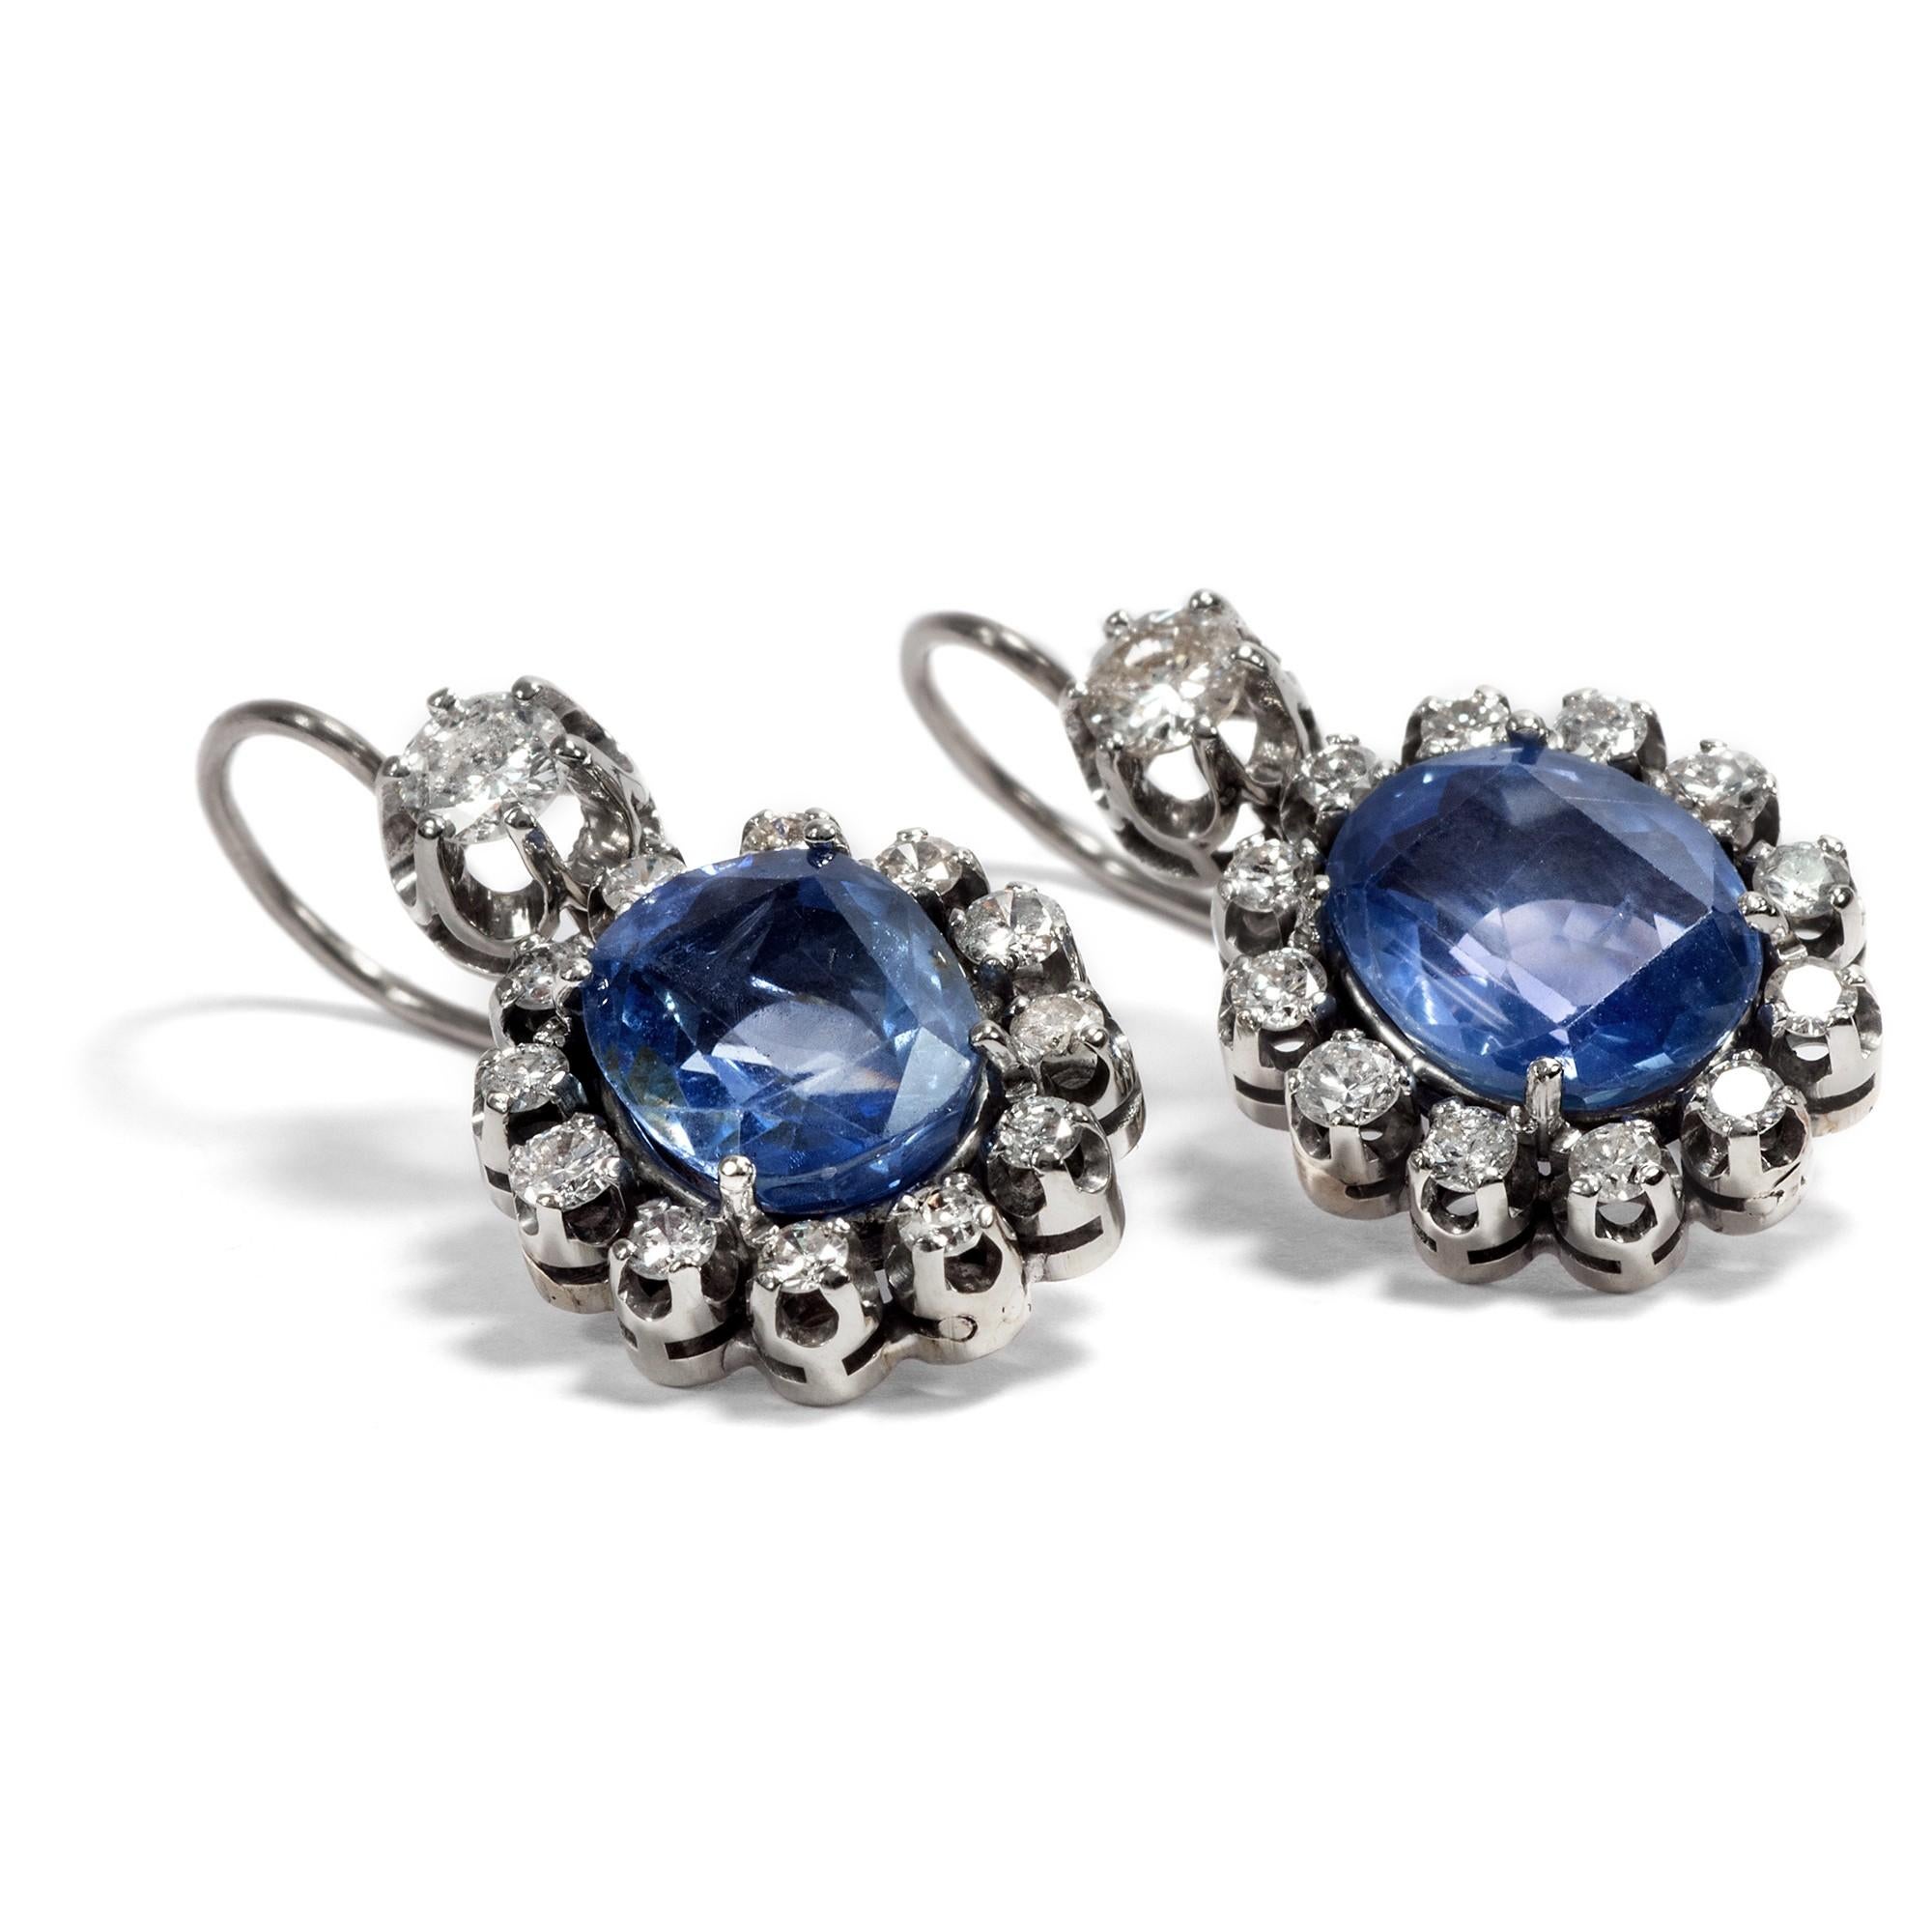 Ceylon has long since been the most famous source of blue sapphires. The island, renamed Sri Lanka in 1972, lies on the North-Eastern side of India, in the middle of the Indian Ocean. According to contemporary sources, Ceylon sapphires were set in